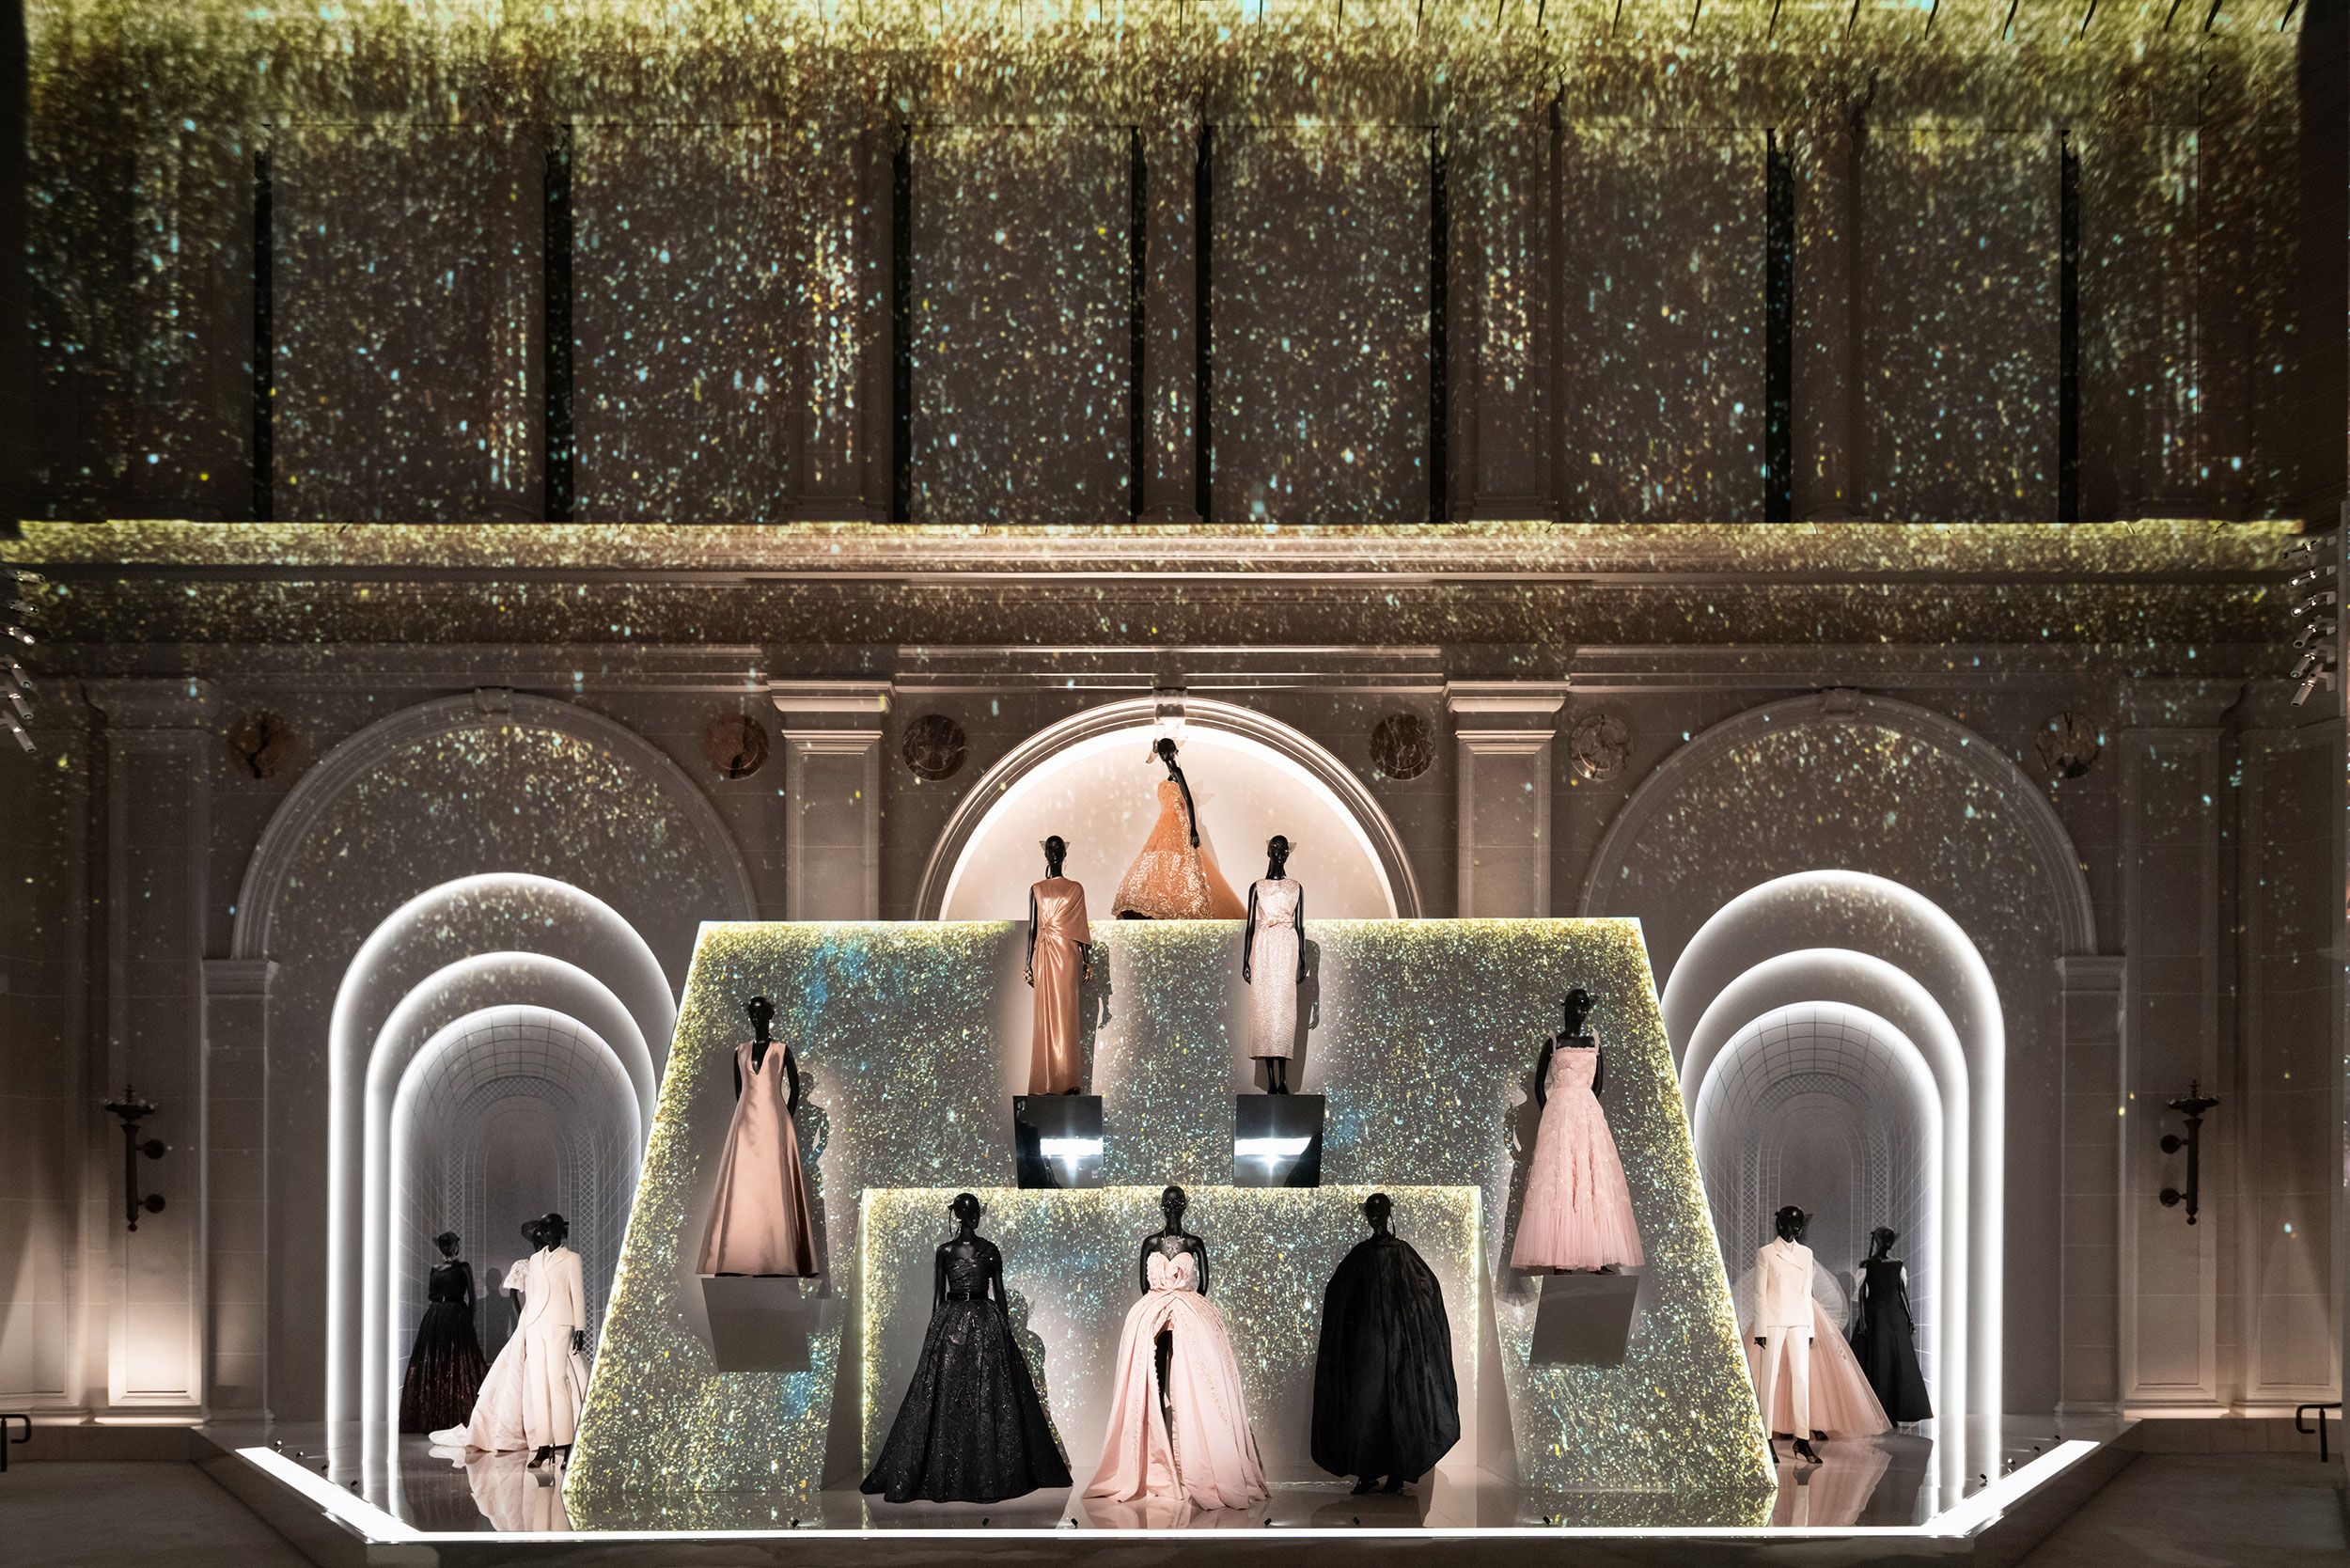 La Galerie Dior the exhibition about the history of Maison Christian Dior  at the 30 Montaigne museum  Sortirapariscom